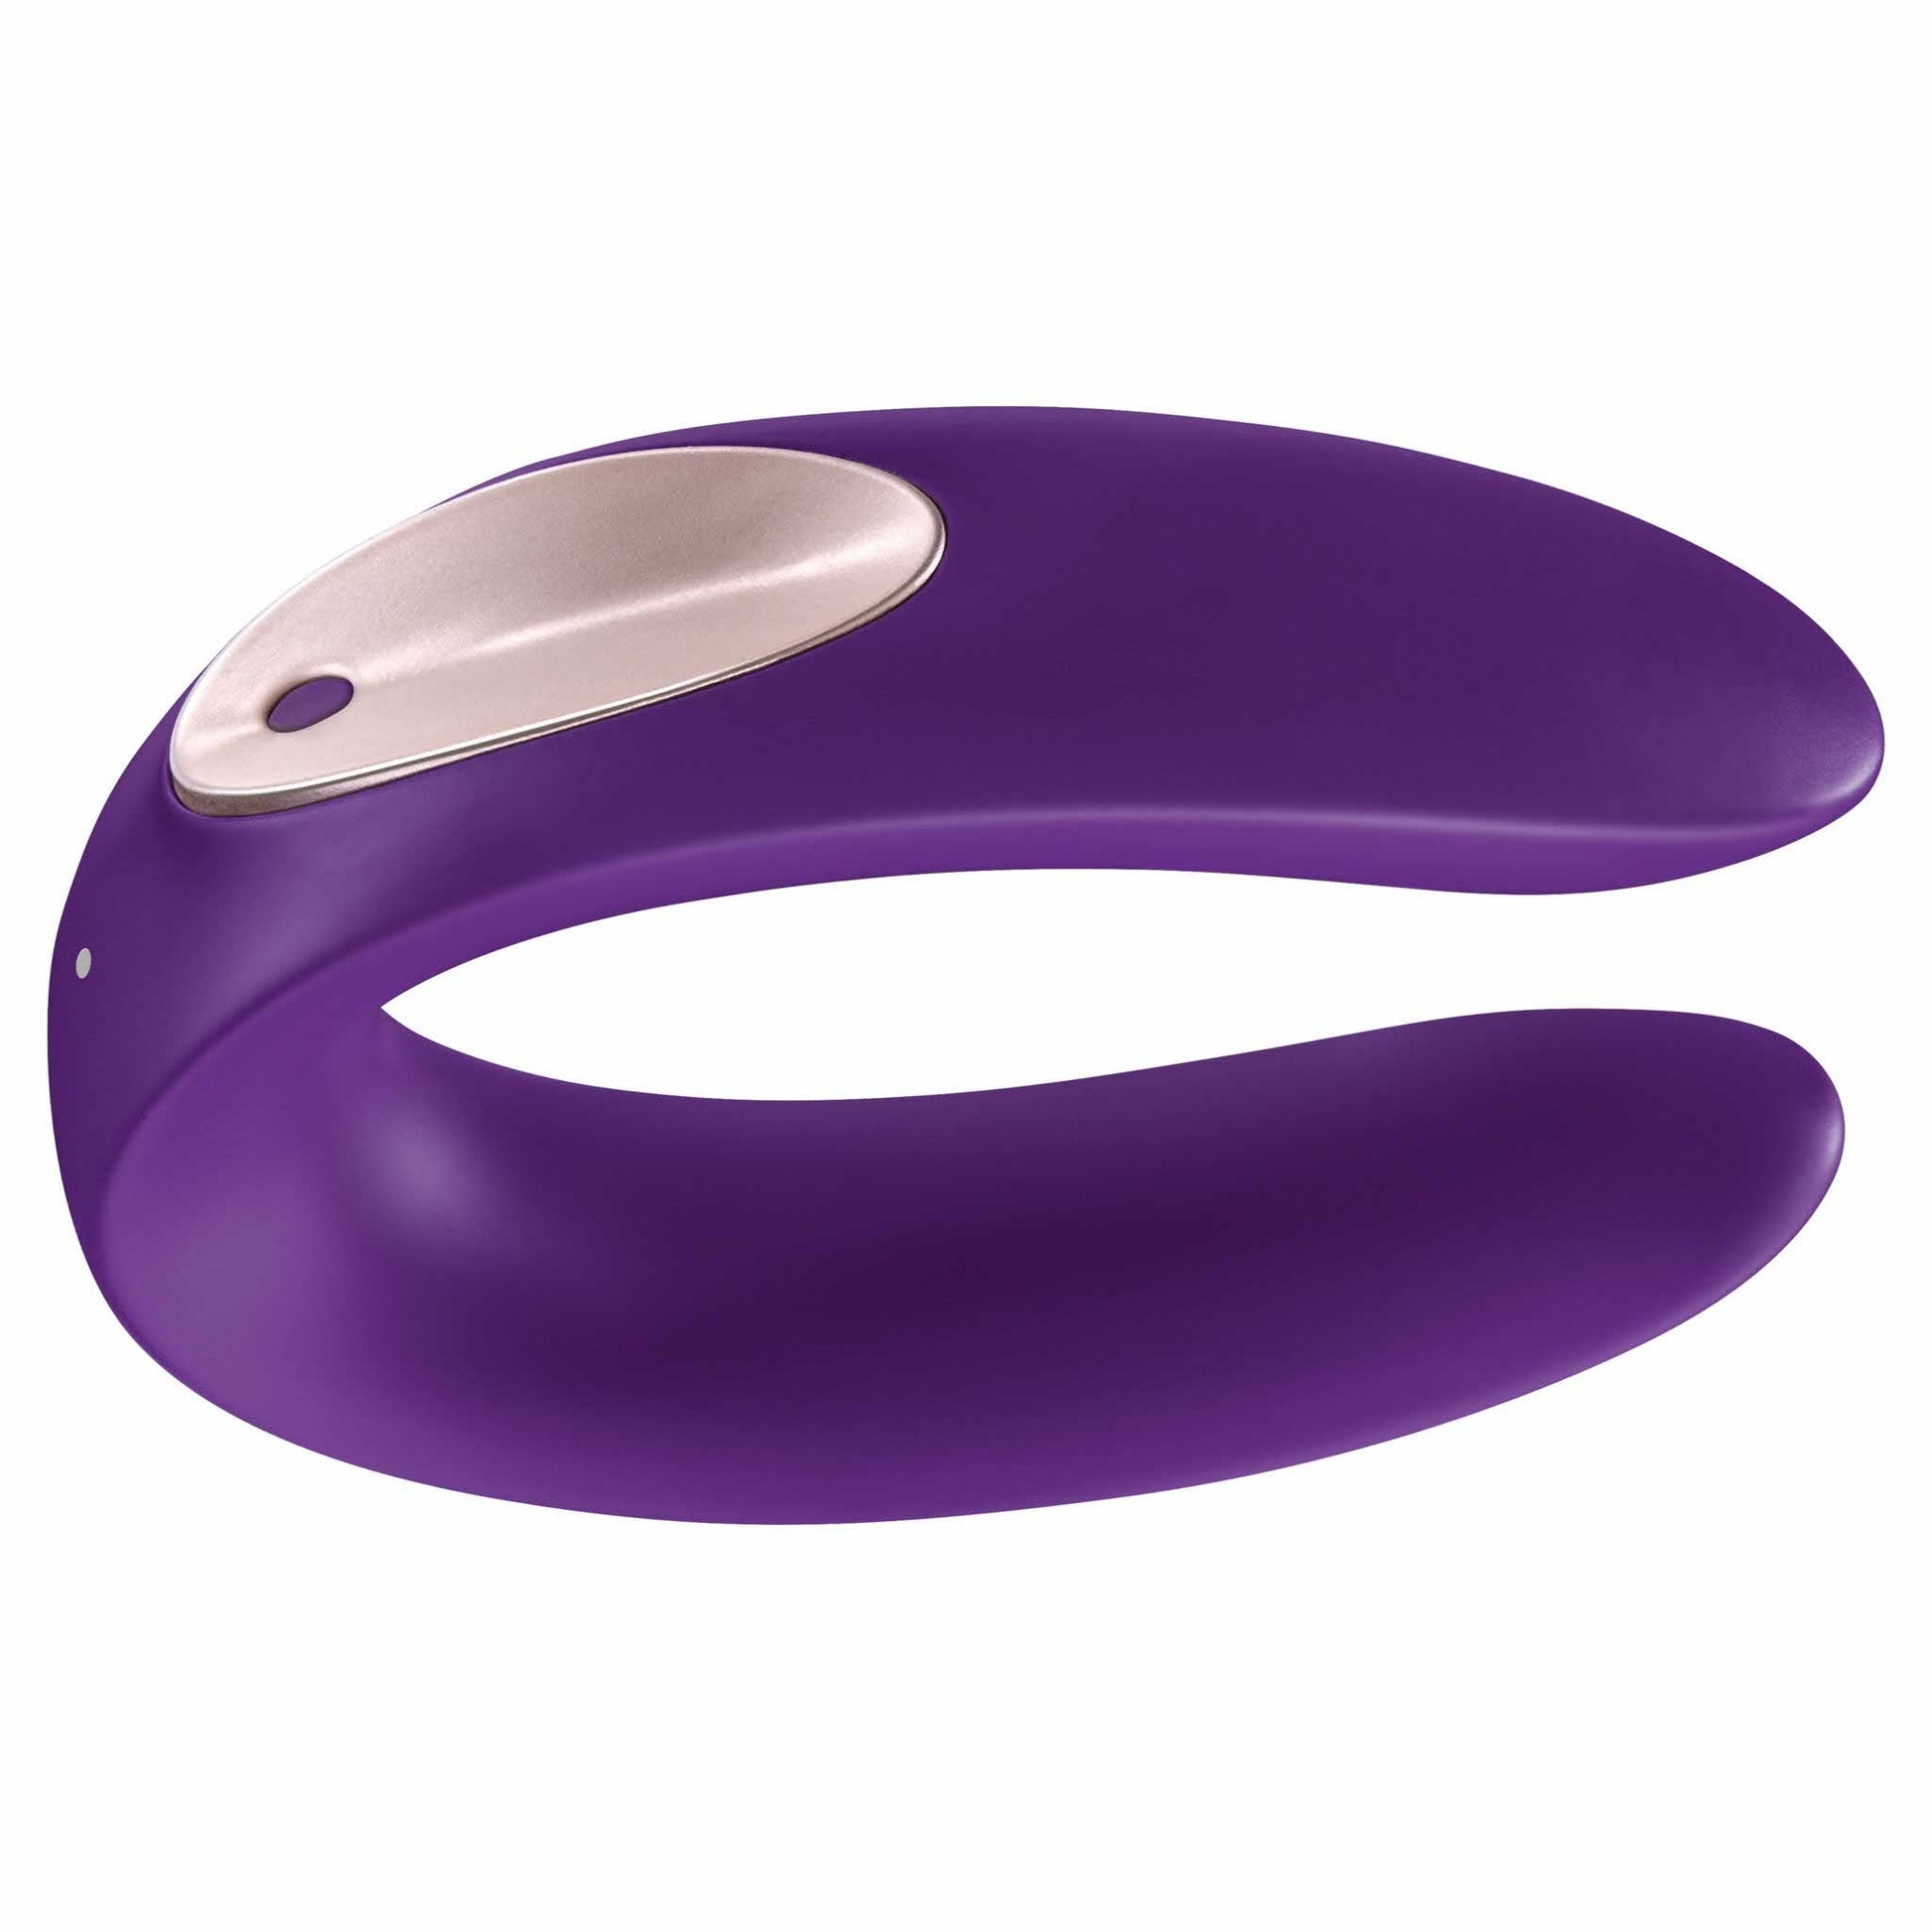 angled view of the satisfyer double plus remote control couples vibrator eisp04 purple